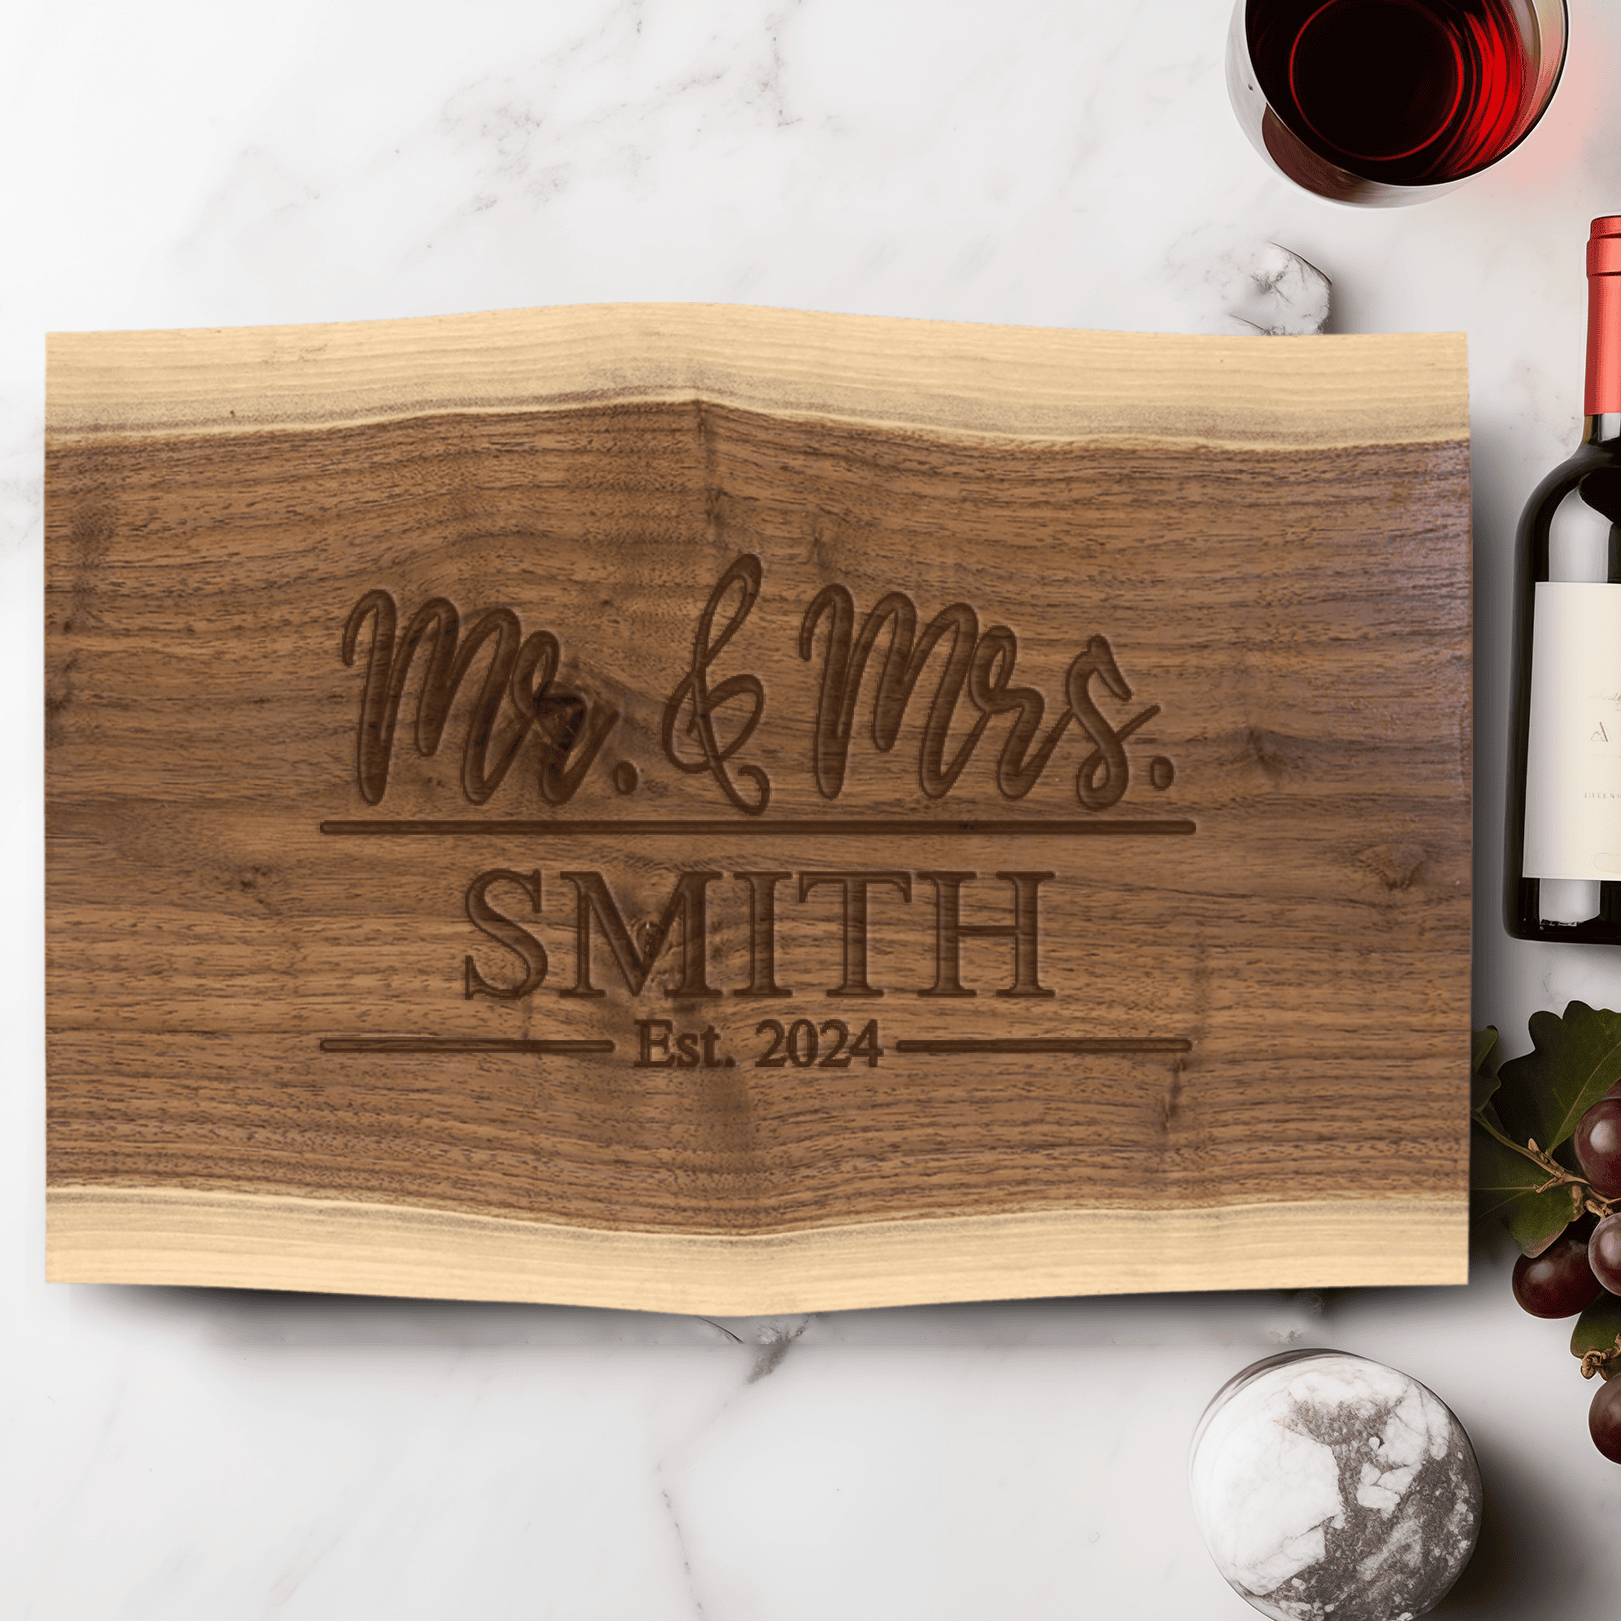 Anniversary Black Walnut Cutting Board With Forever United Arework Design